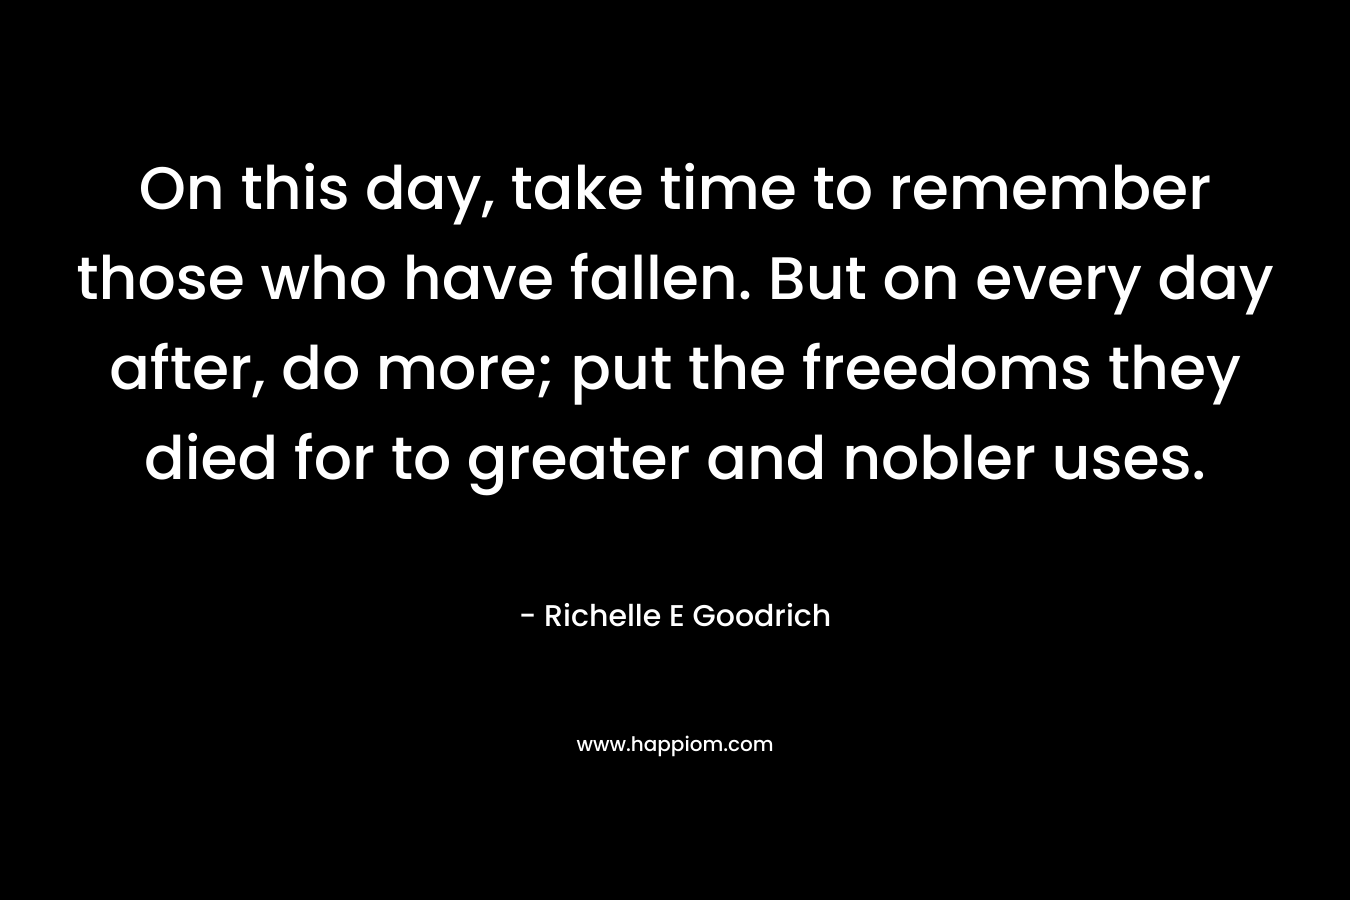 On this day, take time to remember those who have fallen. But on every day after, do more; put the freedoms they died for to greater and nobler uses. – Richelle E Goodrich